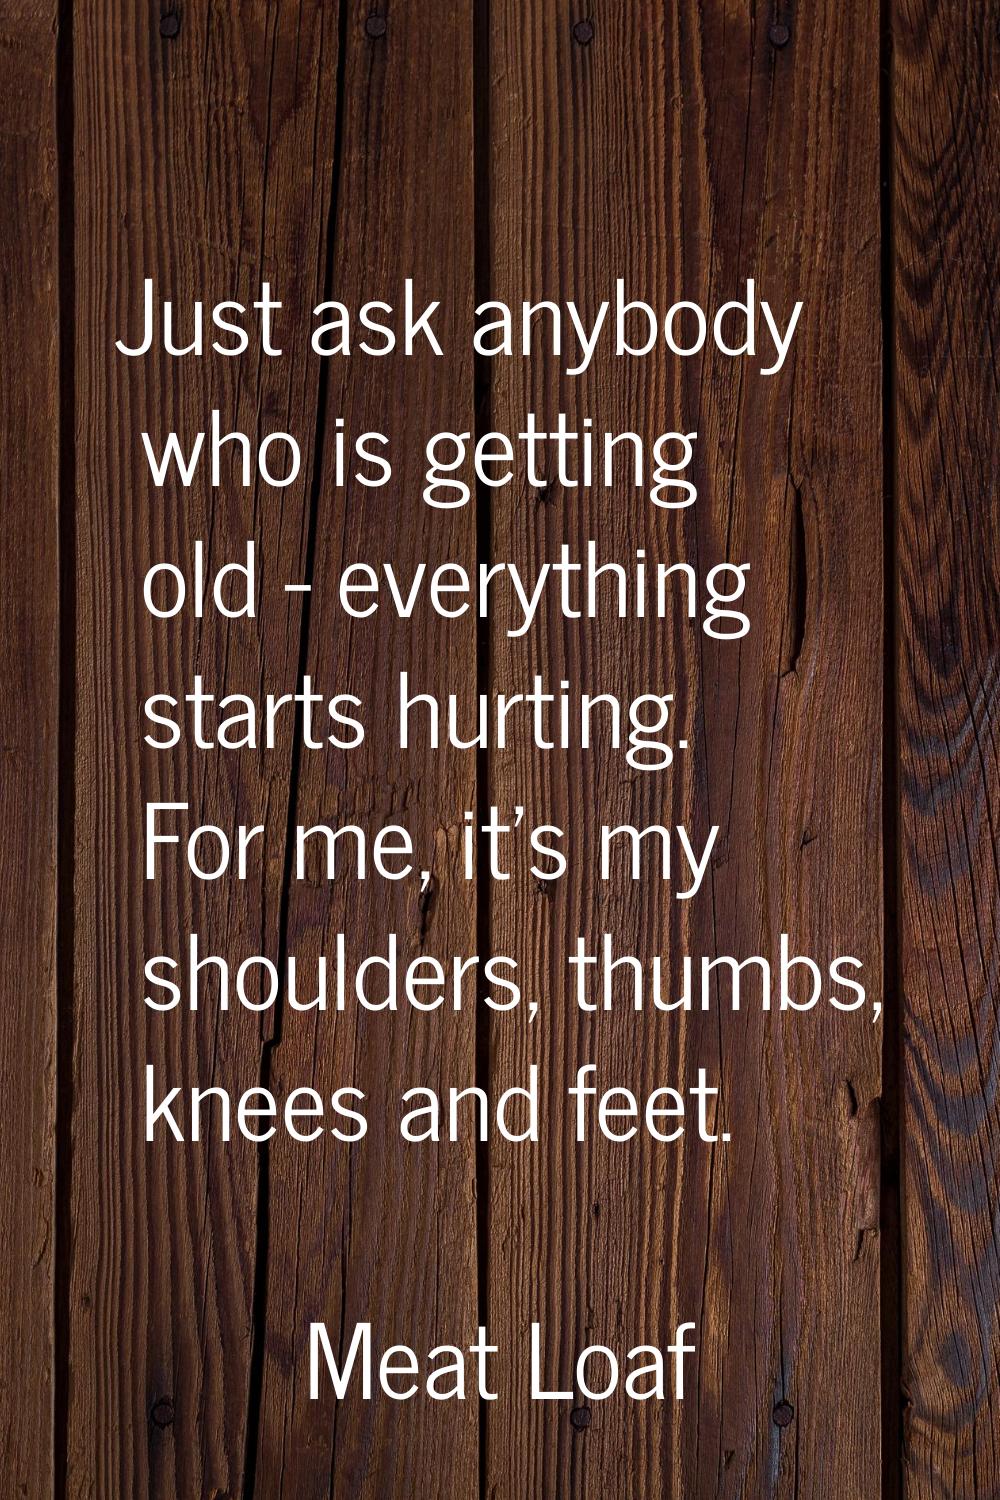 Just ask anybody who is getting old - everything starts hurting. For me, it's my shoulders, thumbs,